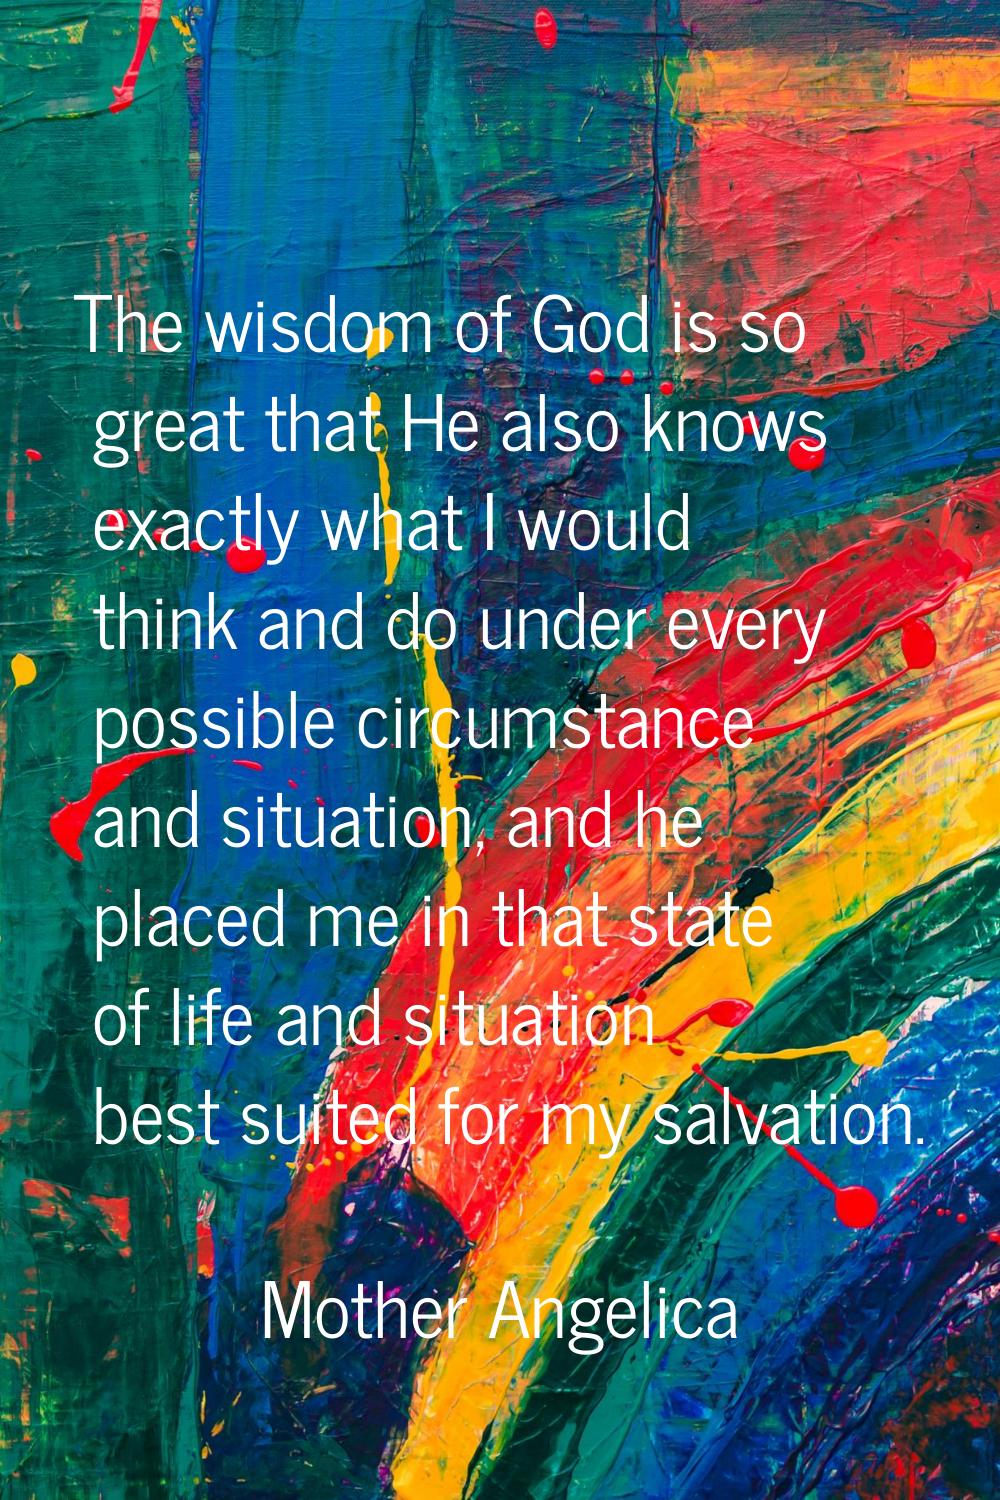 The wisdom of God is so great that He also knows exactly what I would think and do under every poss